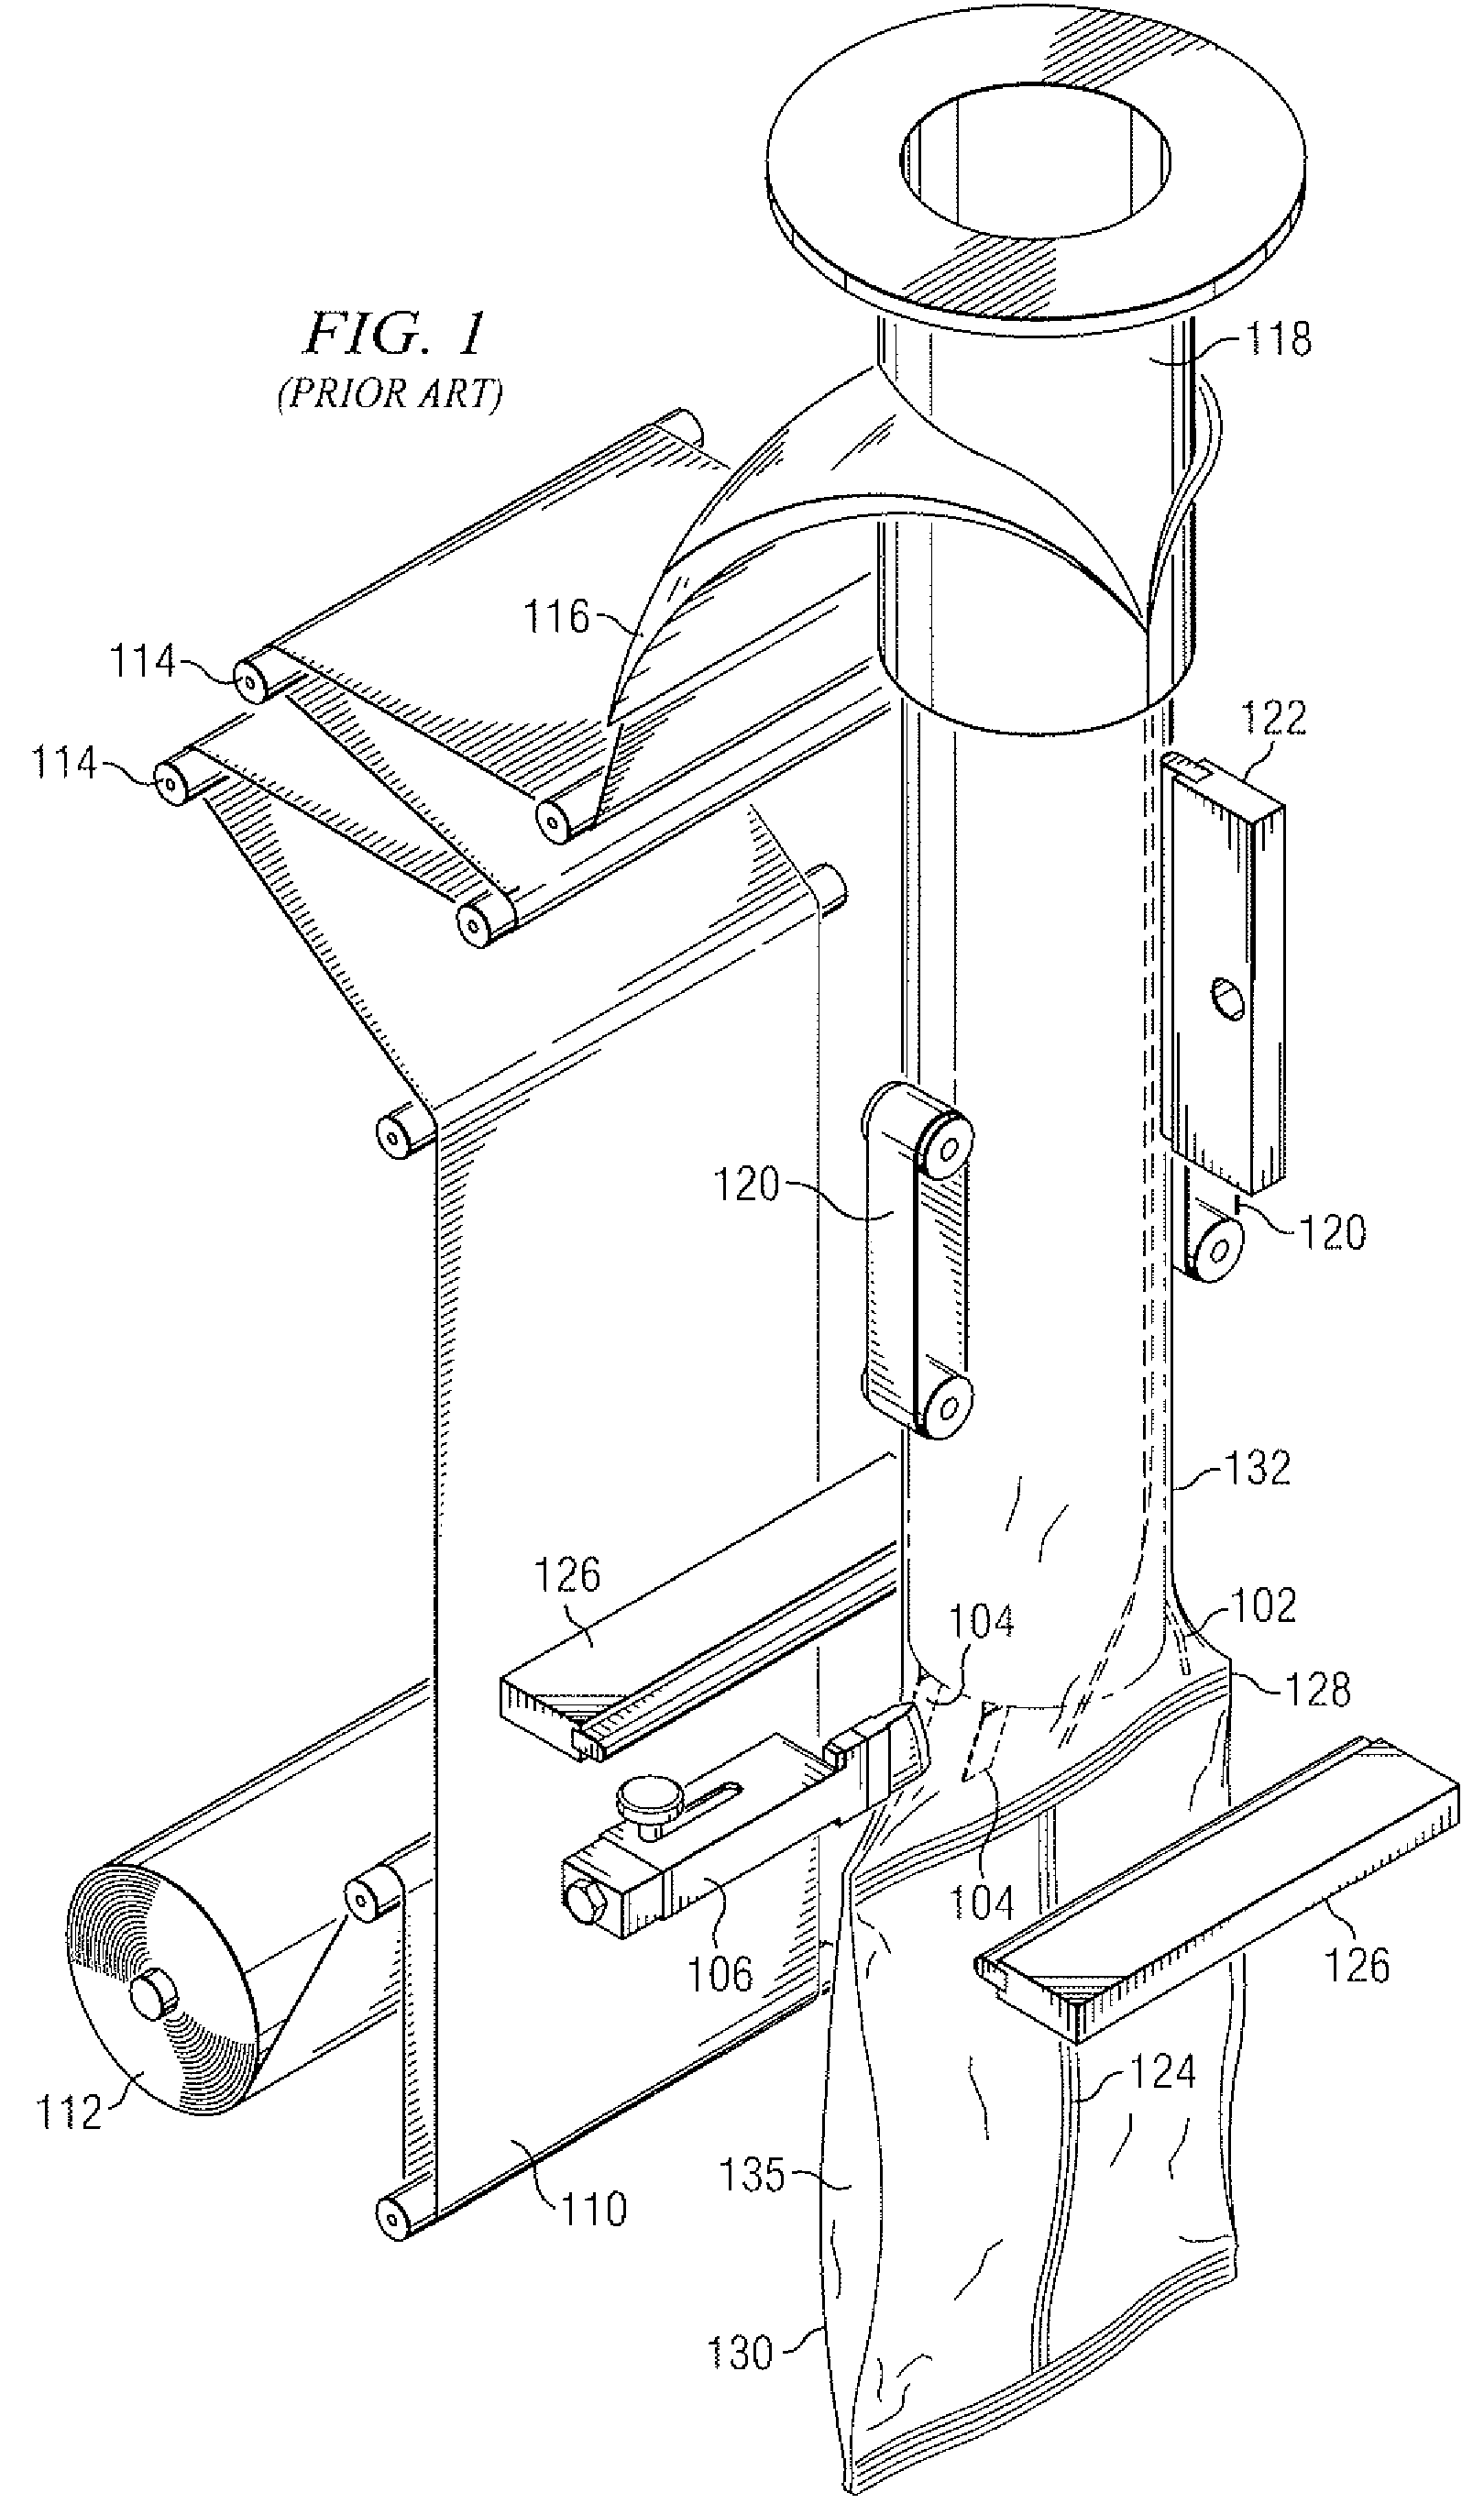 Method for making a multi-compartment microwavable package having a permeable wall between compartments